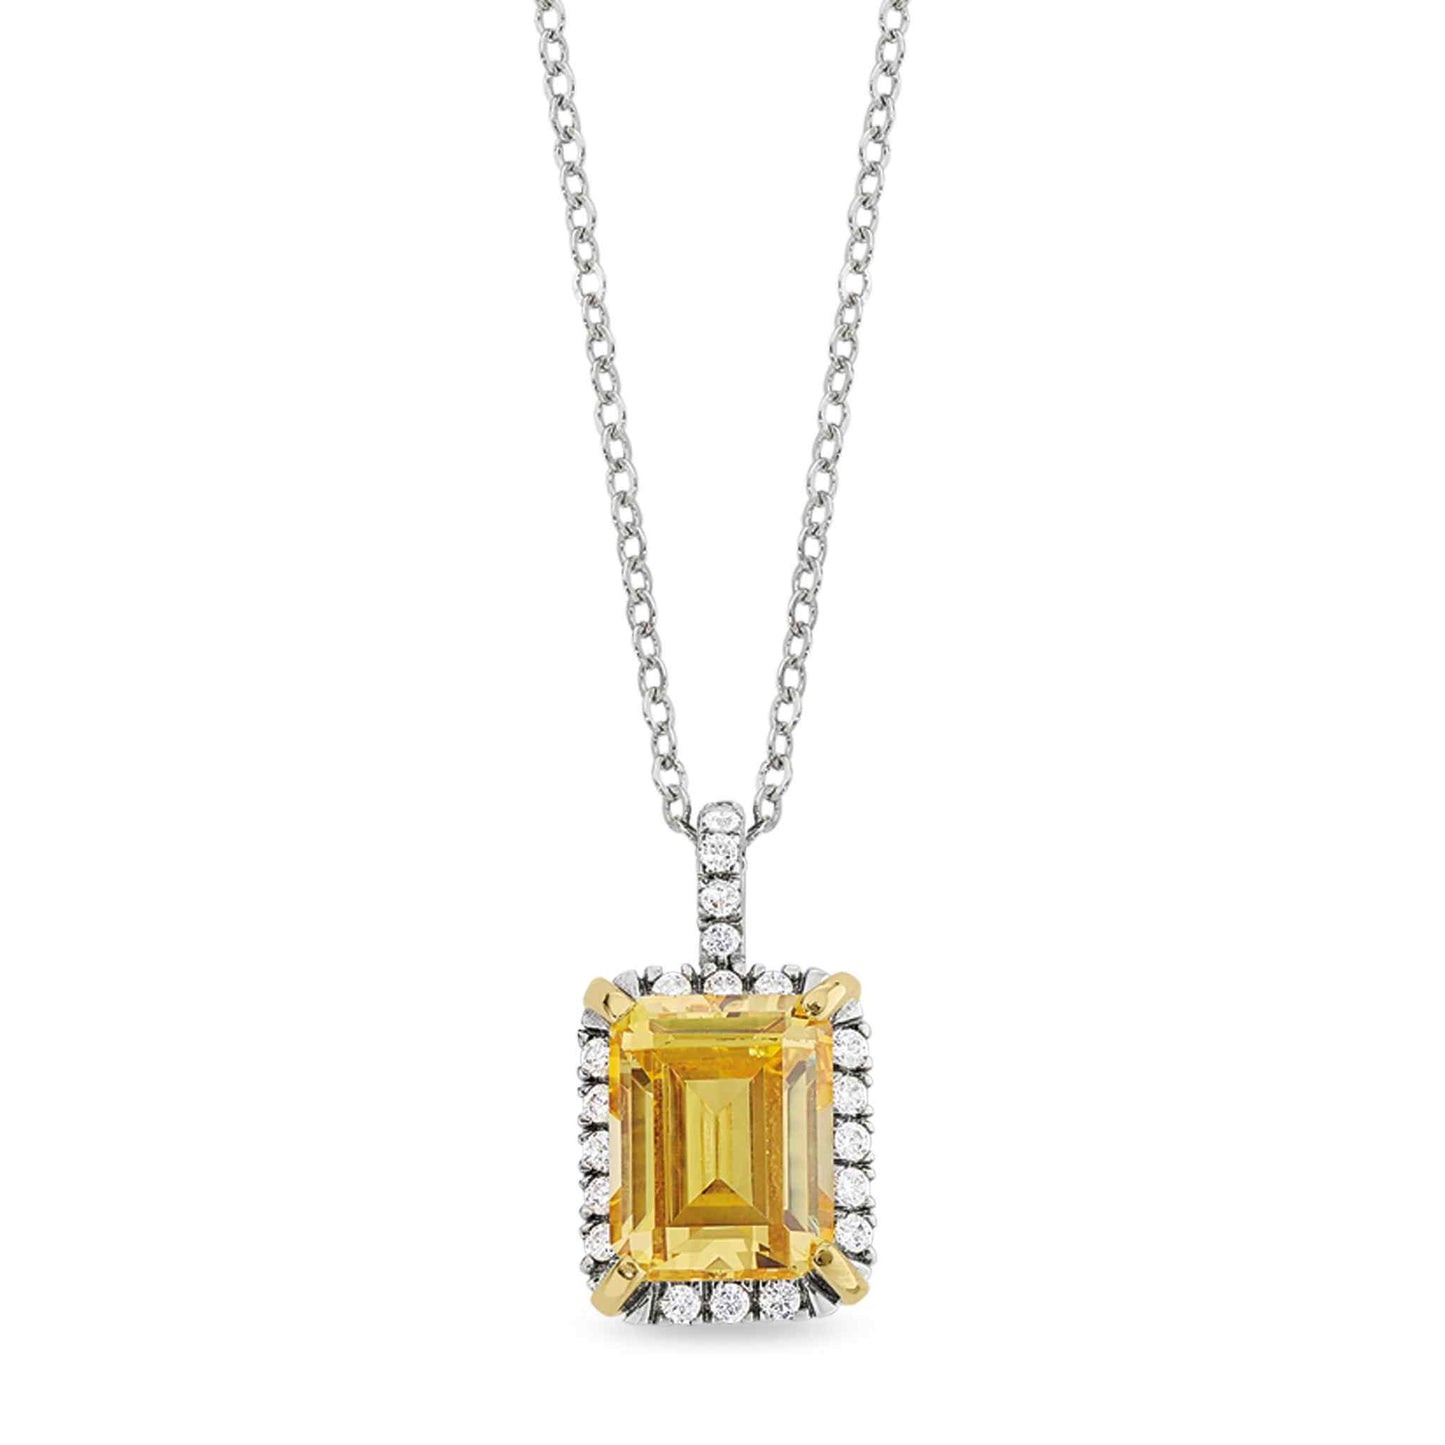 A vintage-style pendant with emerald cut canary stone & simulated diamonds displayed on a neutral white background.